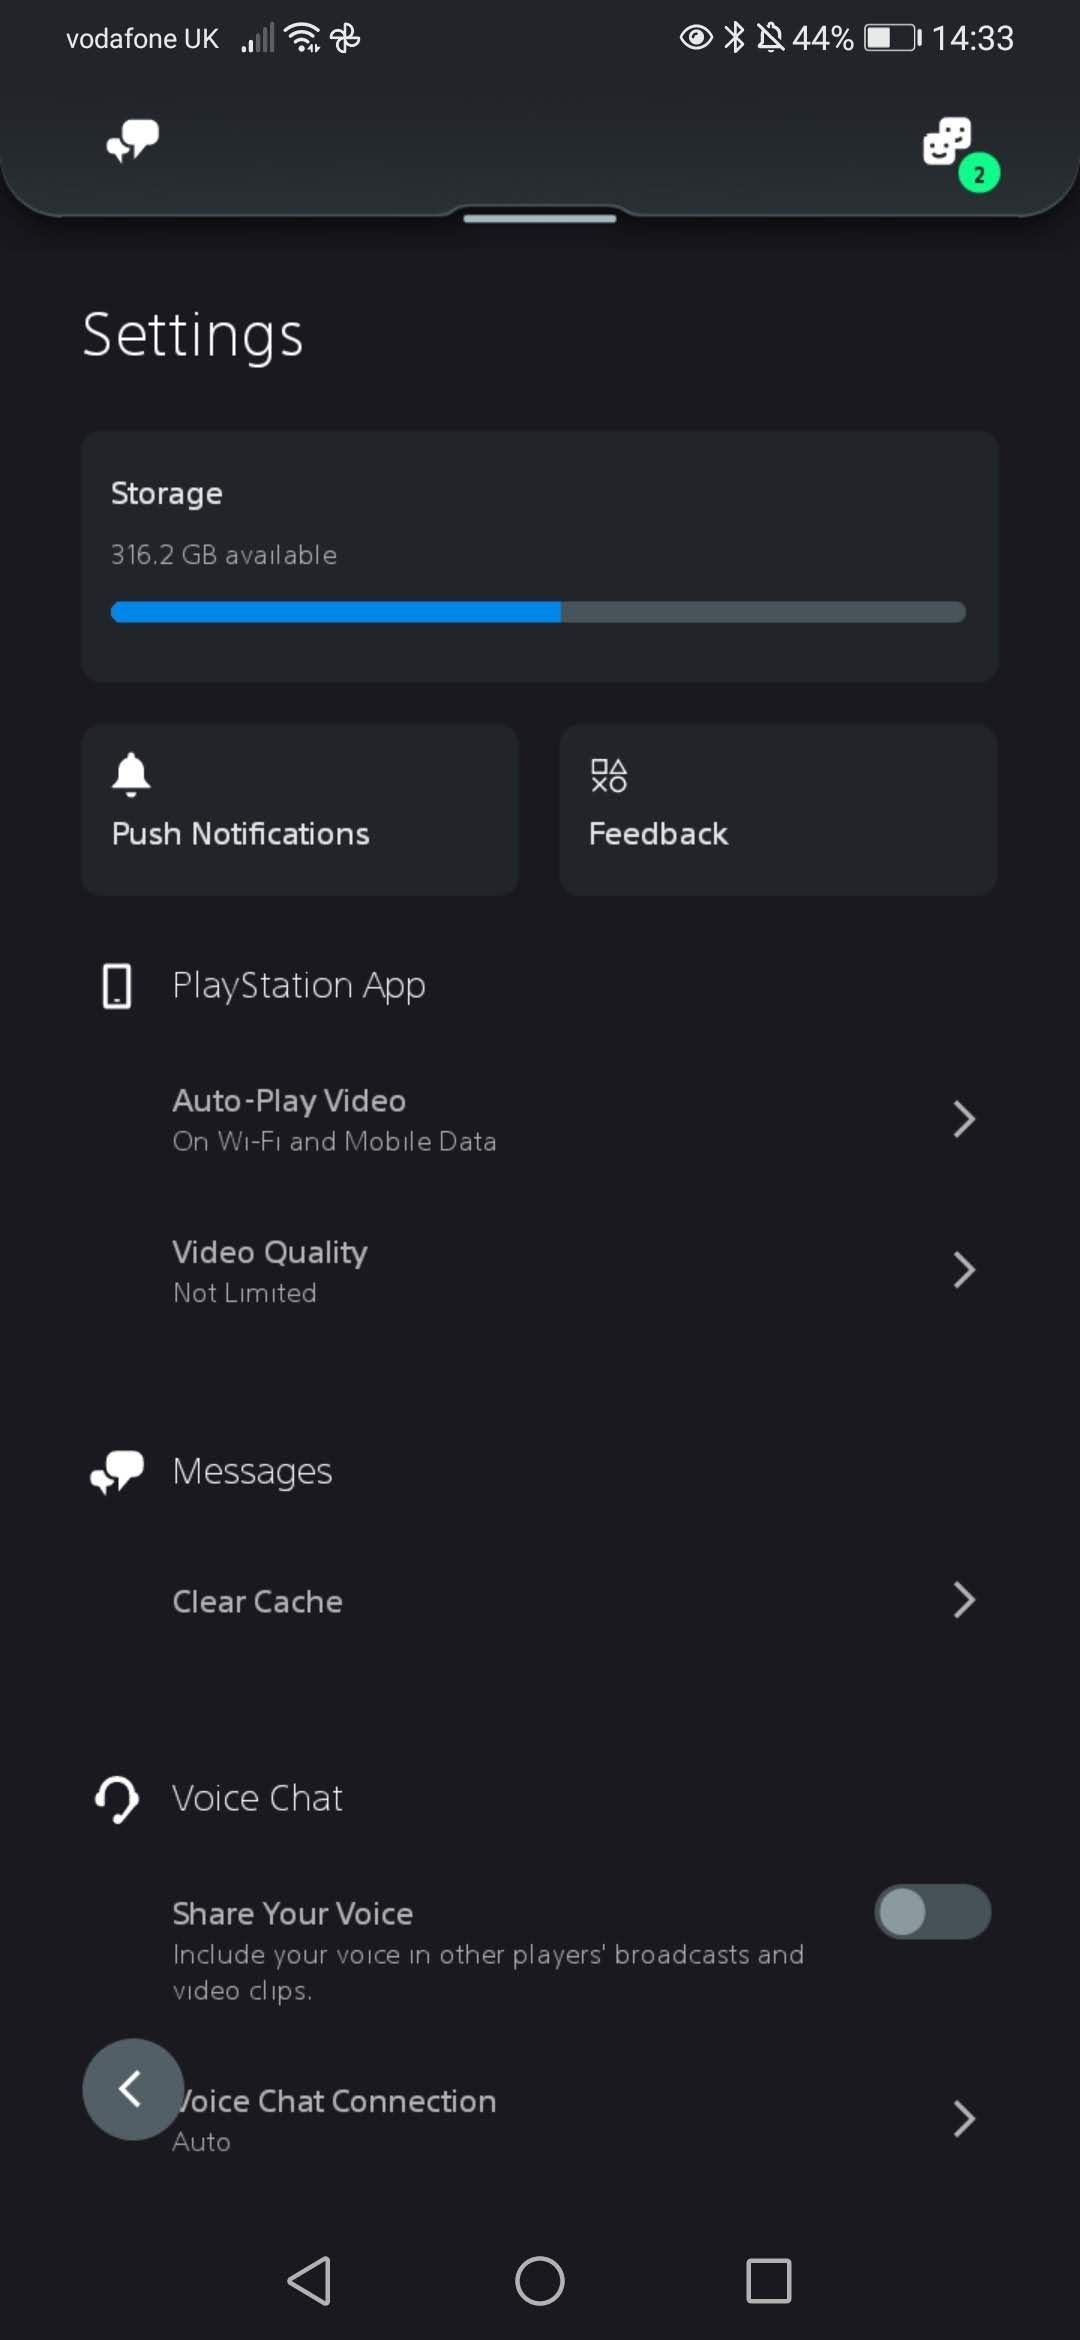 playstation app settings page